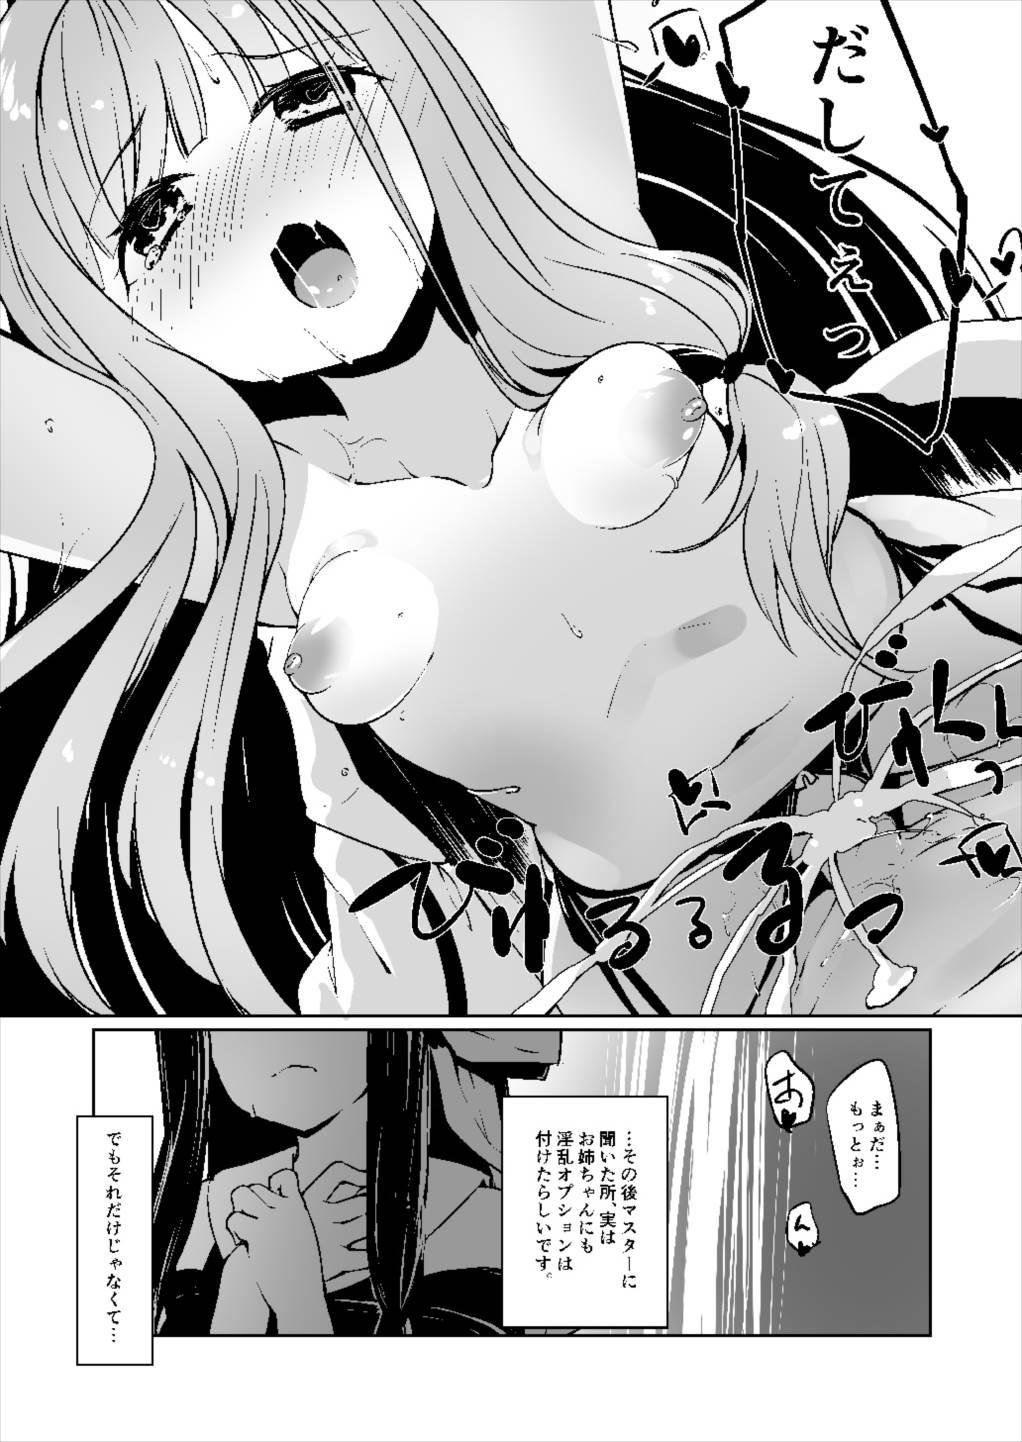 Puta コトノハラバーズ VOL.06 【お姉ちゃん観察日記】 - Vocaloid Voiceroid Cum In Mouth - Page 7